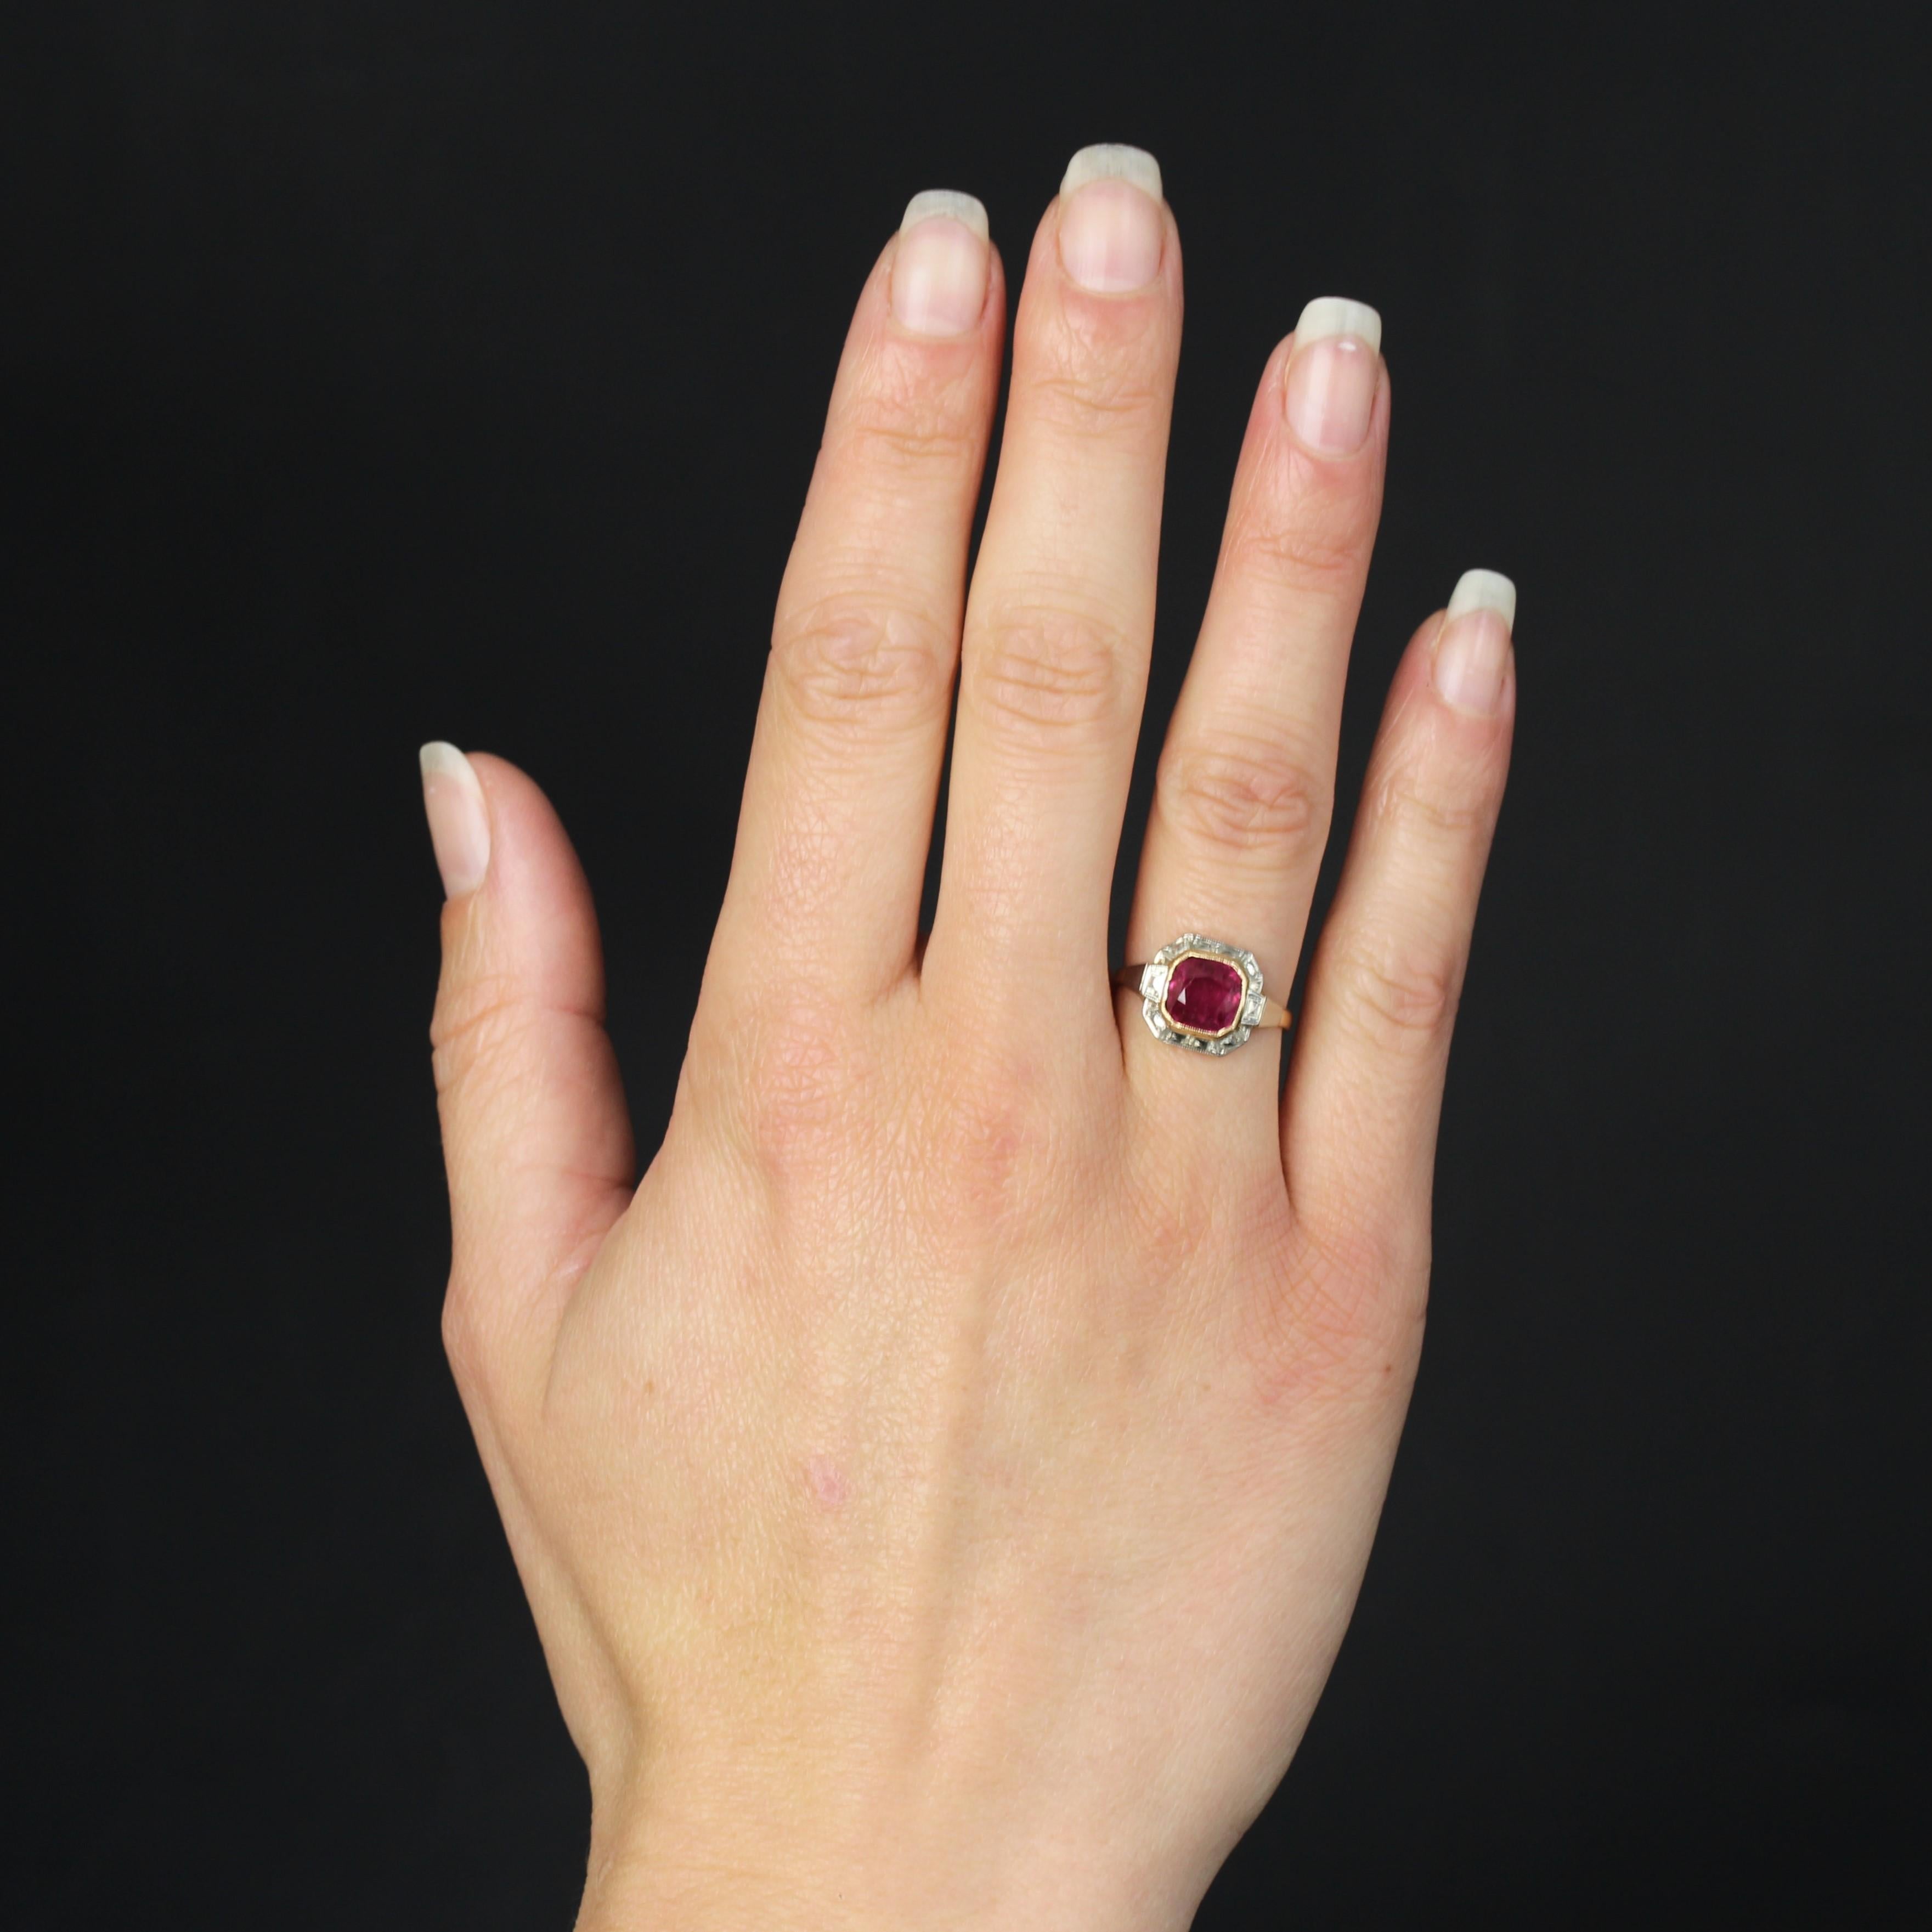 Ring in 18 karat white and yellow gold, eagle's head hallmark.
An Art Deco ring with geometric lines, its setting is adorned with diamond-tipped decorations in white gold and set in the center with a cushion-cut ruby in millegrain closed setting.